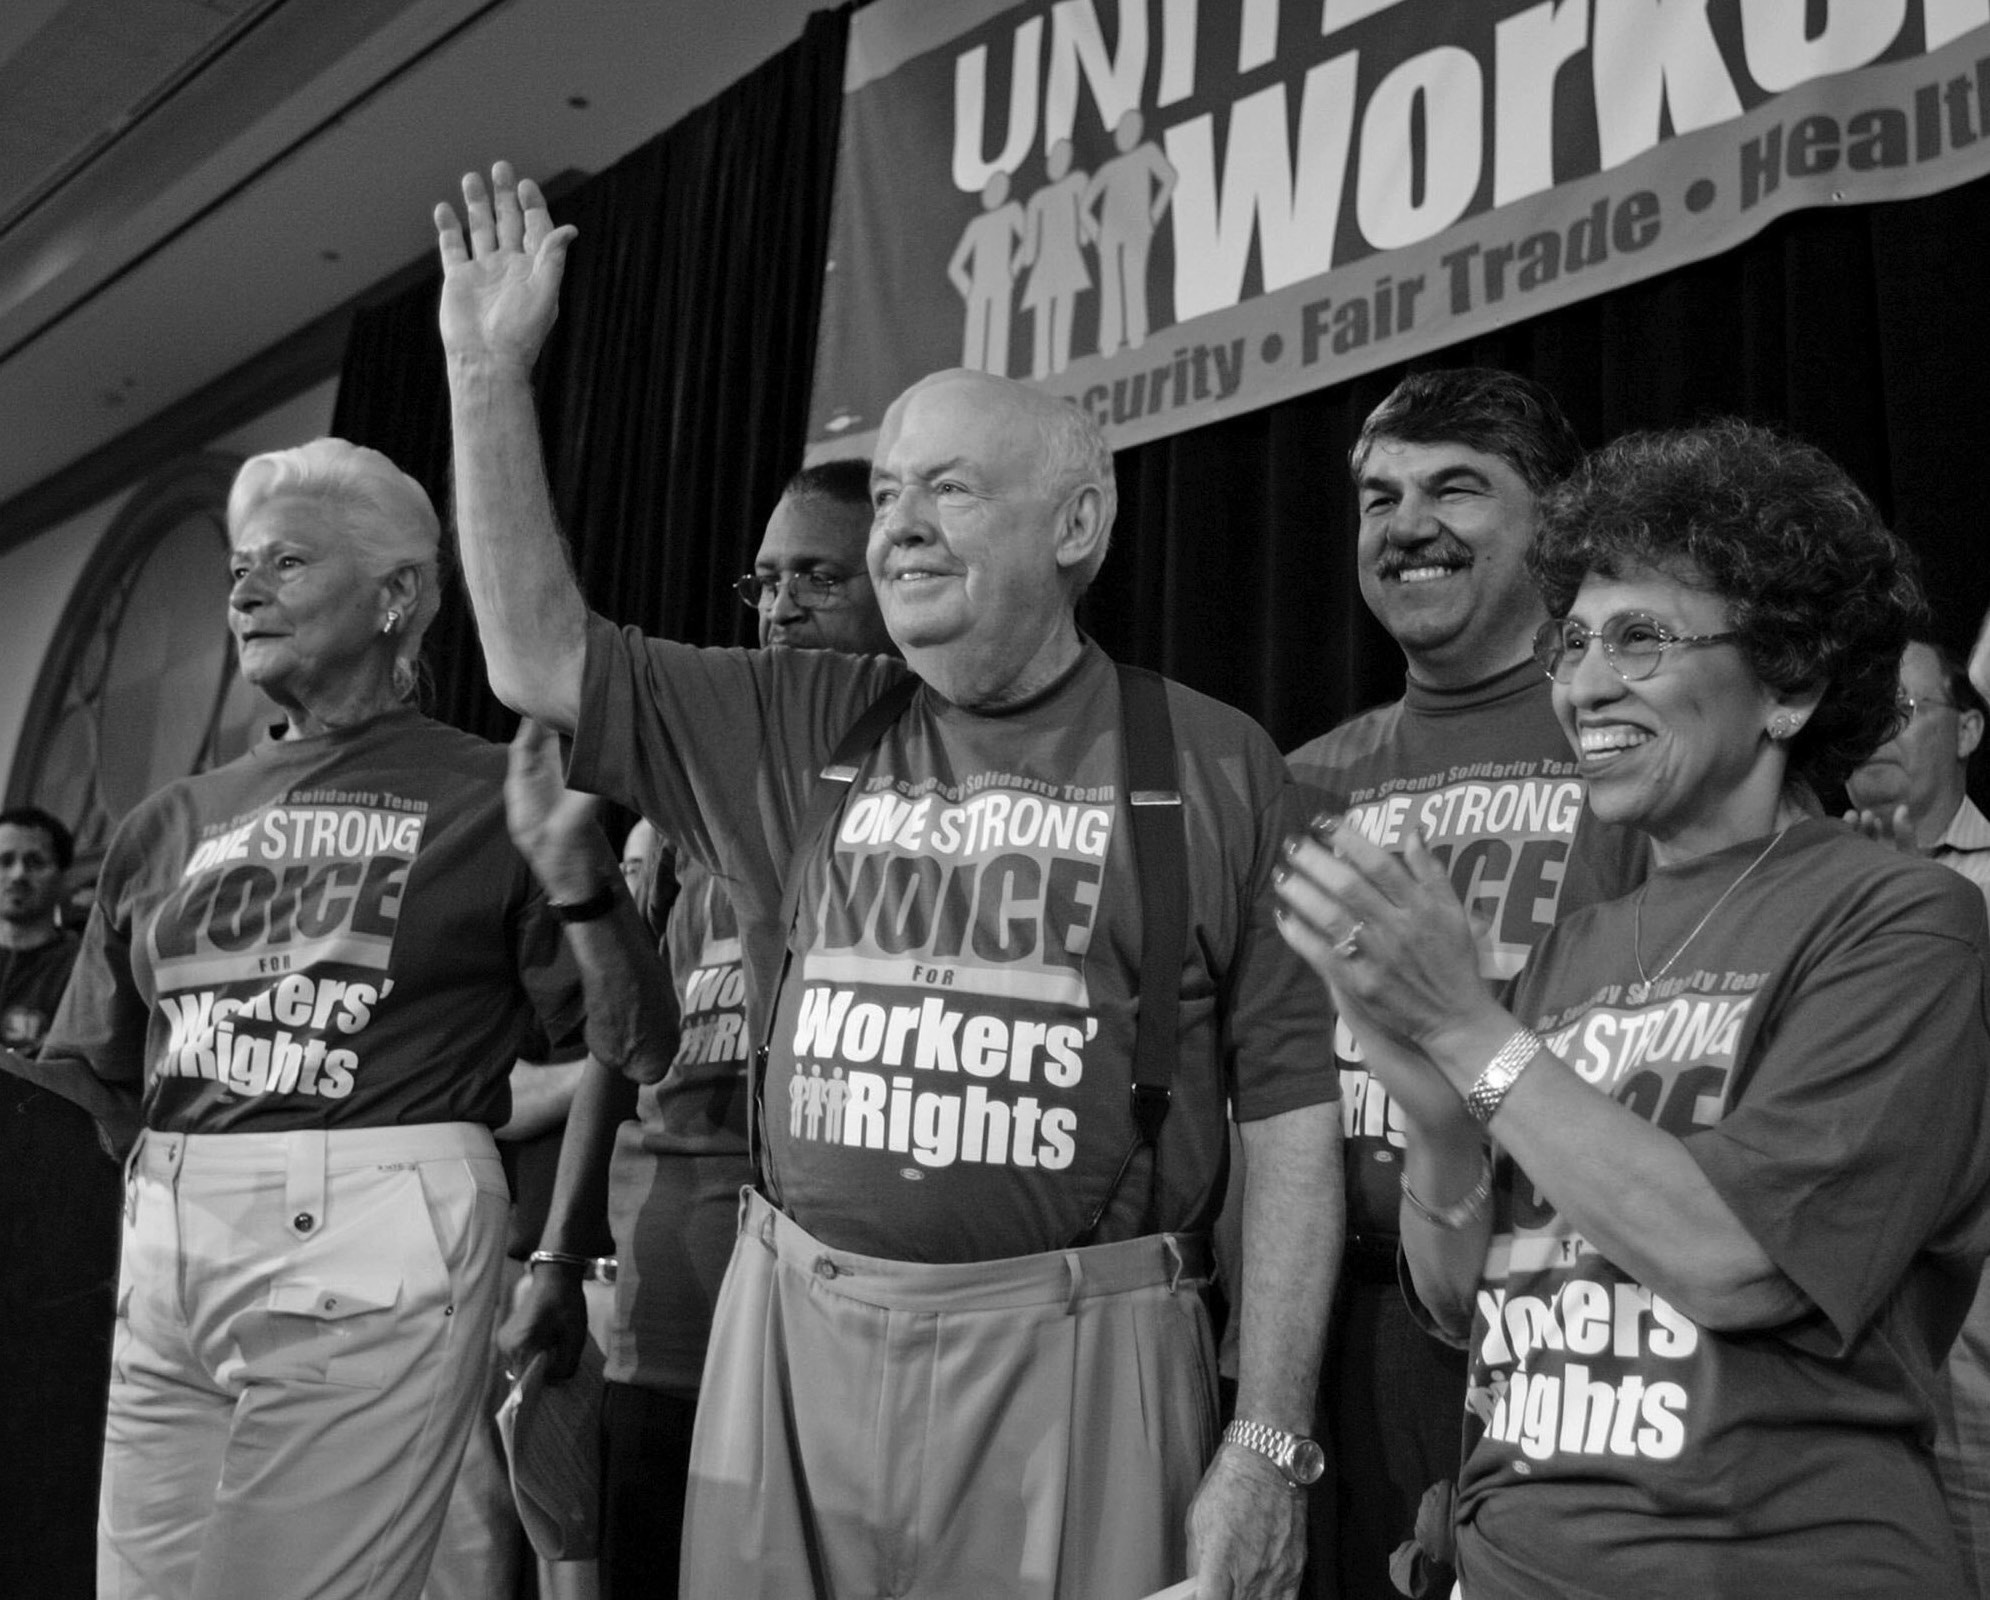 John Sweeney, center, after speaking at a union solidarity rally in Chicago in 2005. At right was his deputy, Linda Chavez-Thompson, executive vice president of the A.F.L.-C.I.O. Behind him, at right, was his eventual successor, Richard L. Trumka. Credit: Brian Kersey/Associated Press